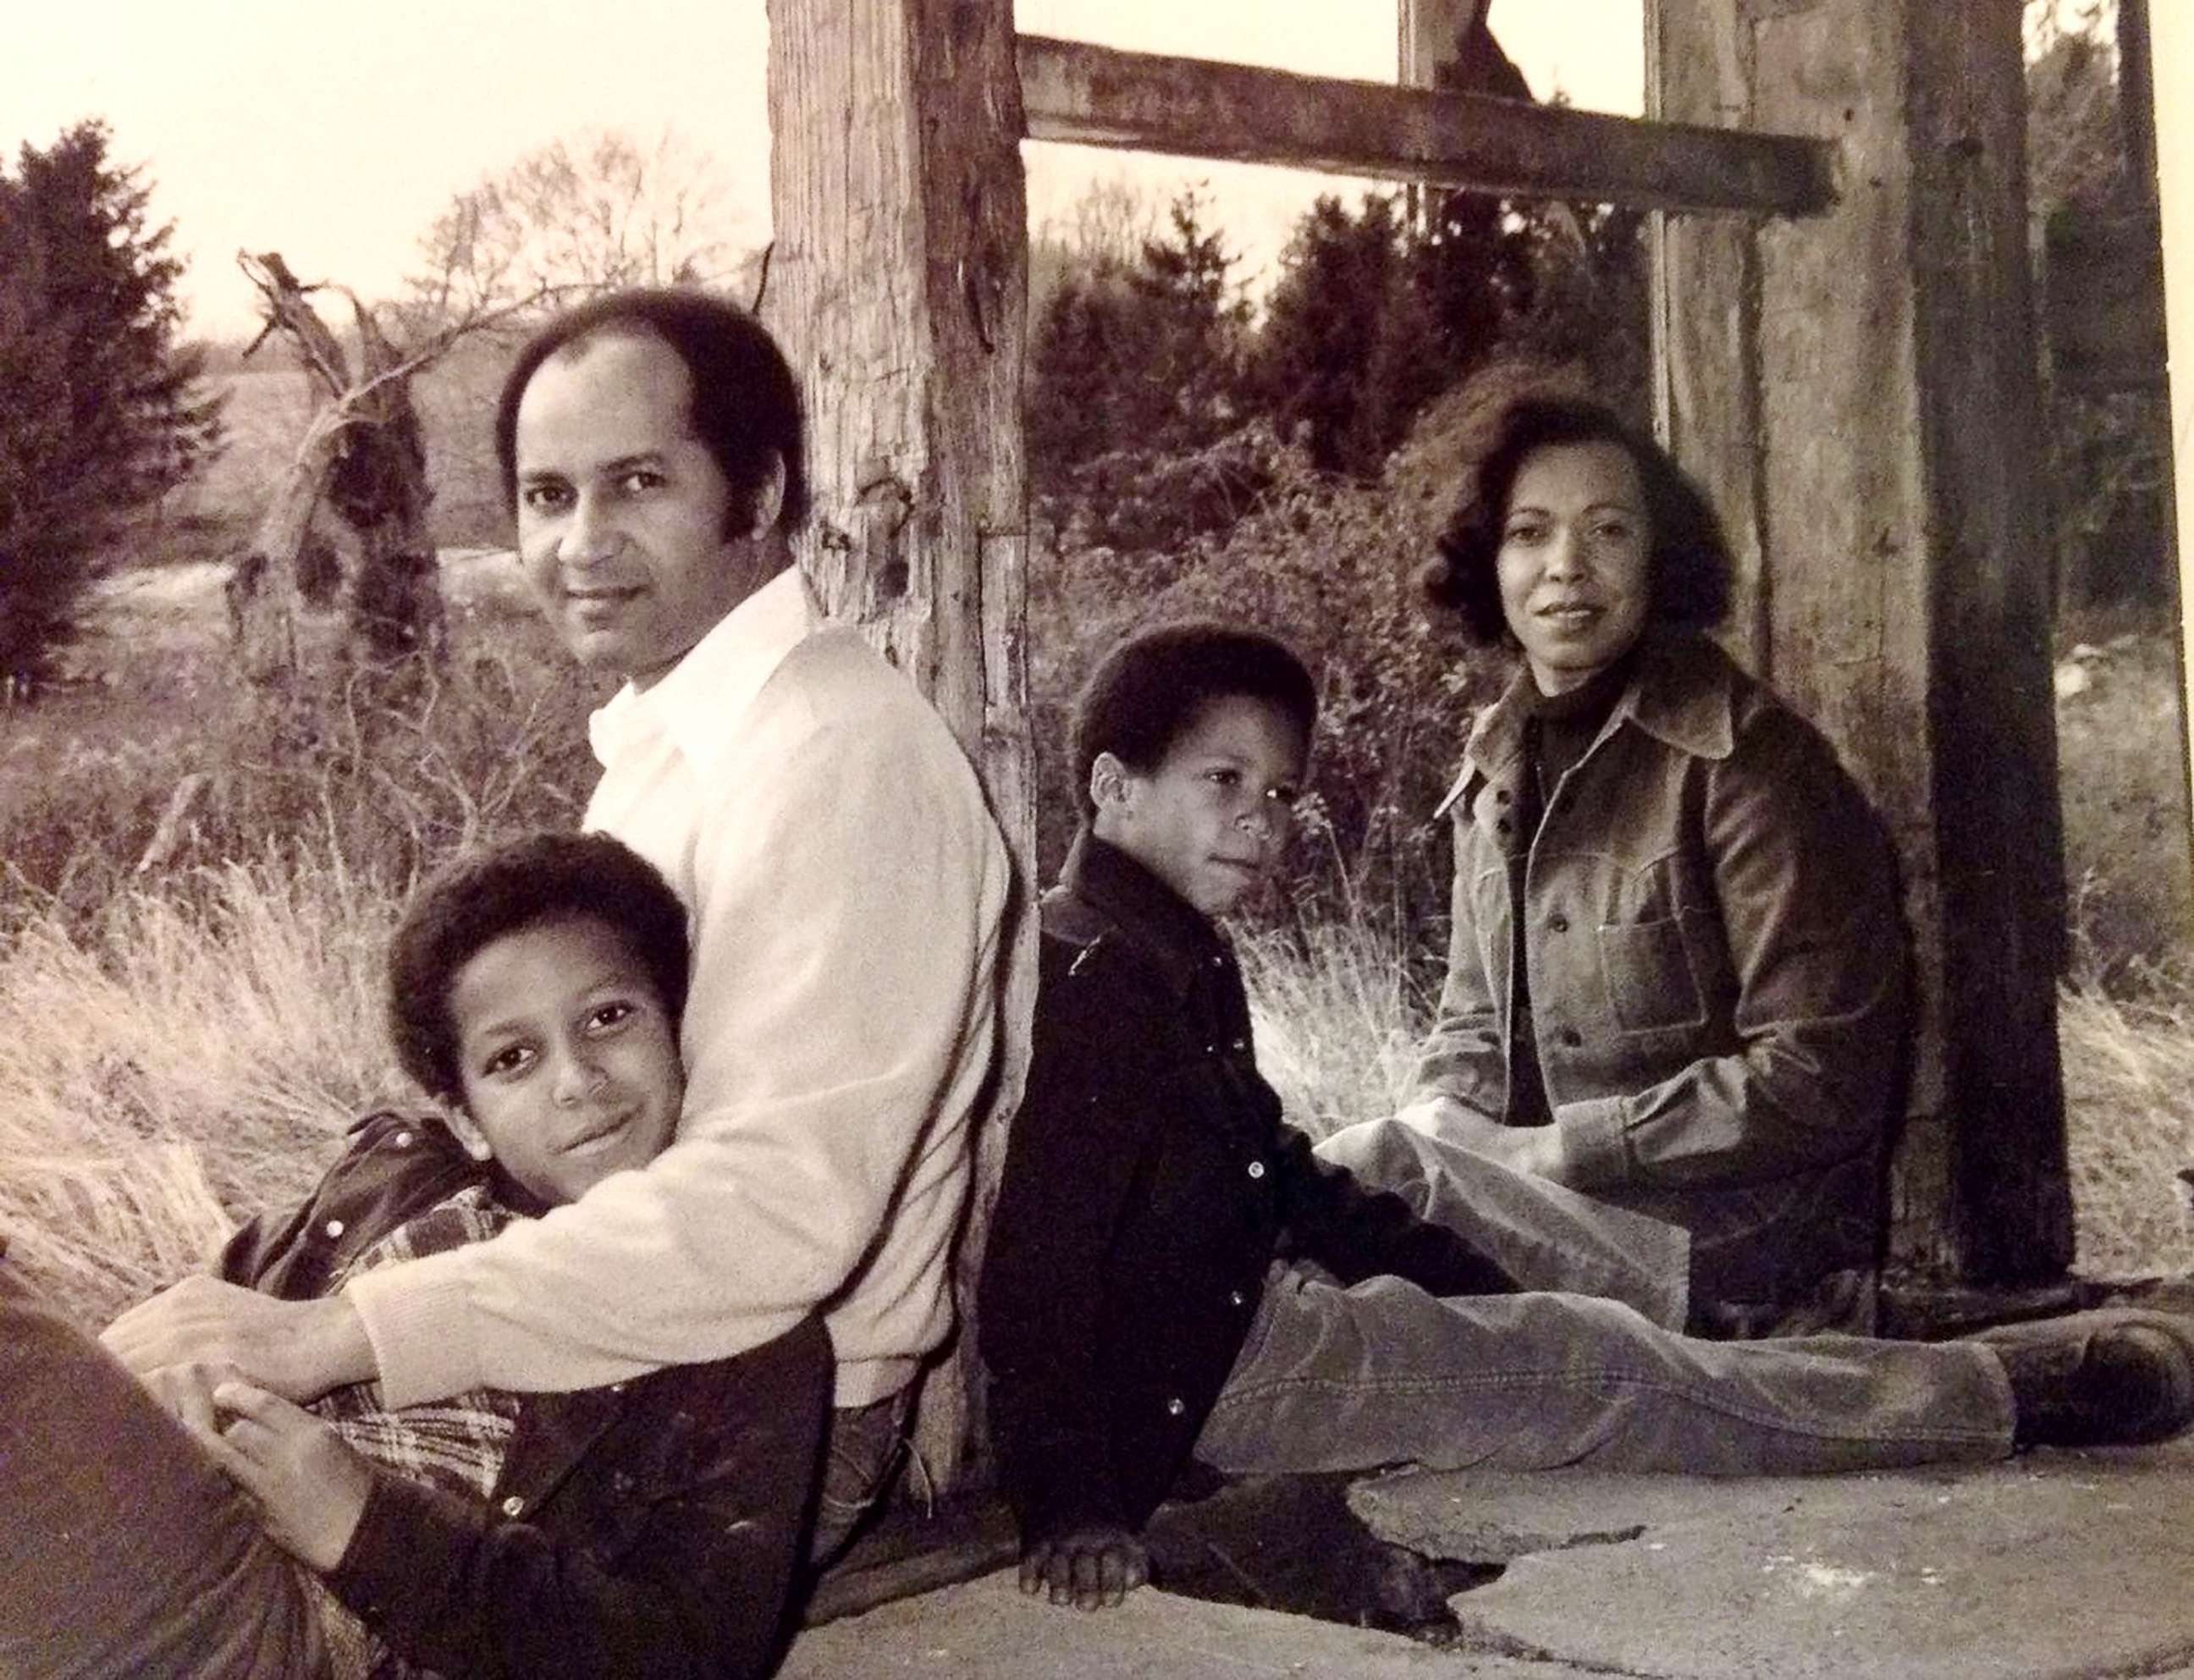 PHOTO: Sen. Cory Booker with his dad, Cary Booker, and brother and mother in an undated photo.